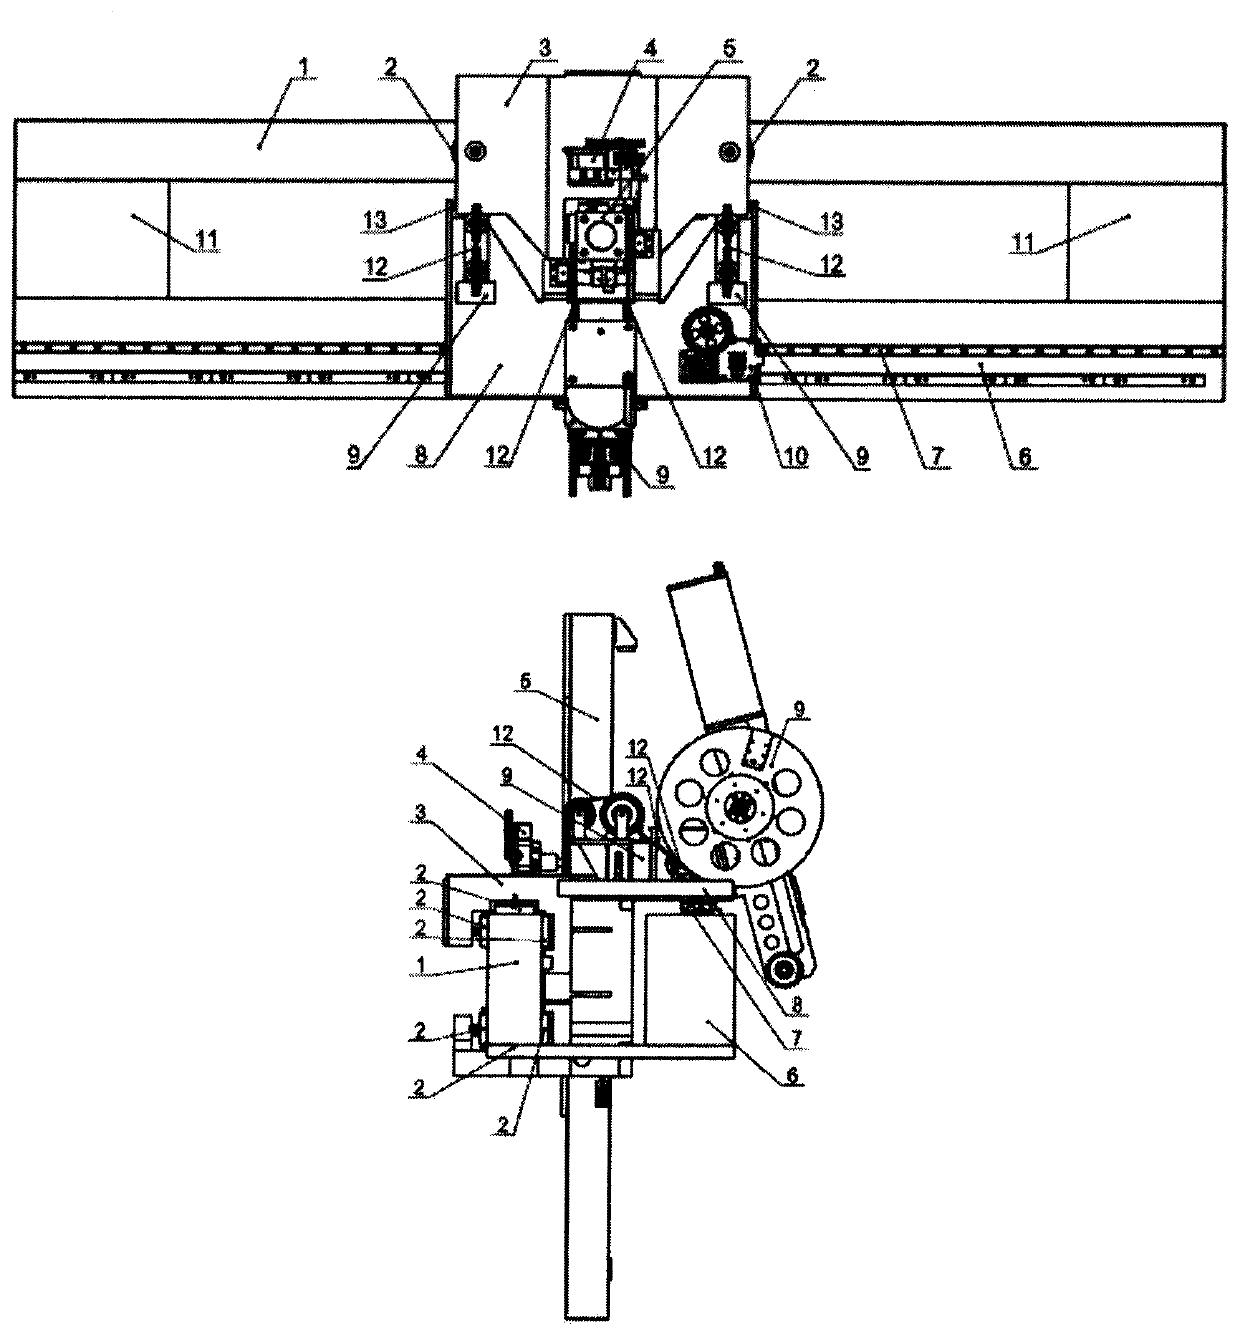 Double beam design structure of gantry measuring machine combined with guide beam and load-bearing driving beam